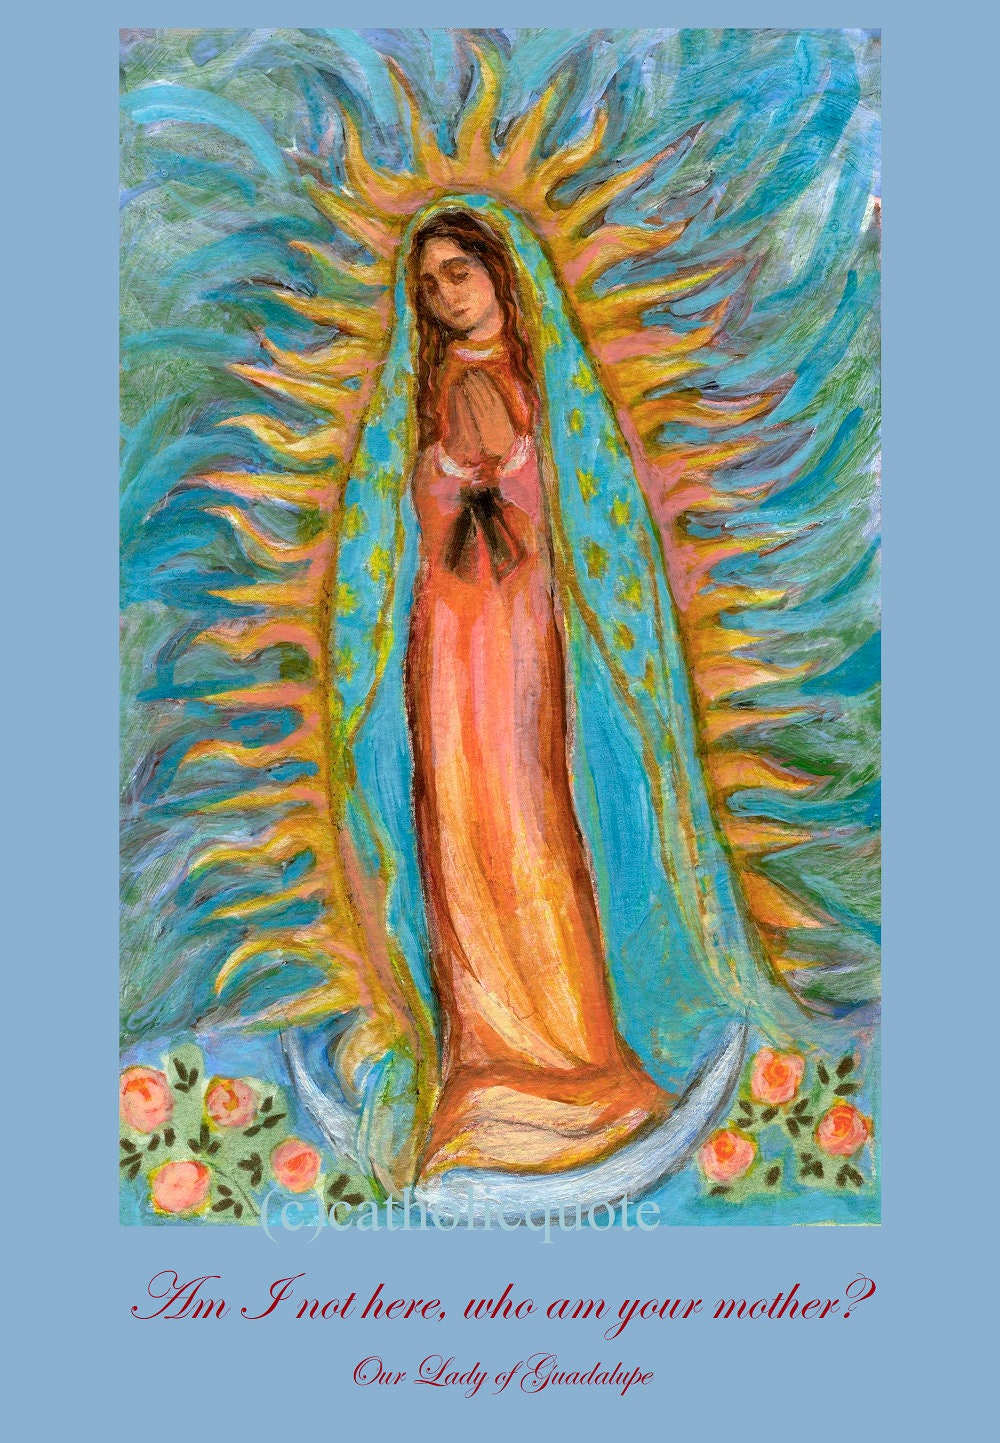 Our Lady of Guadalupe quote – 8.5x11" – Catholic Art Print – Archival Quality – Sue Kouma Johnson – Authentic Quote